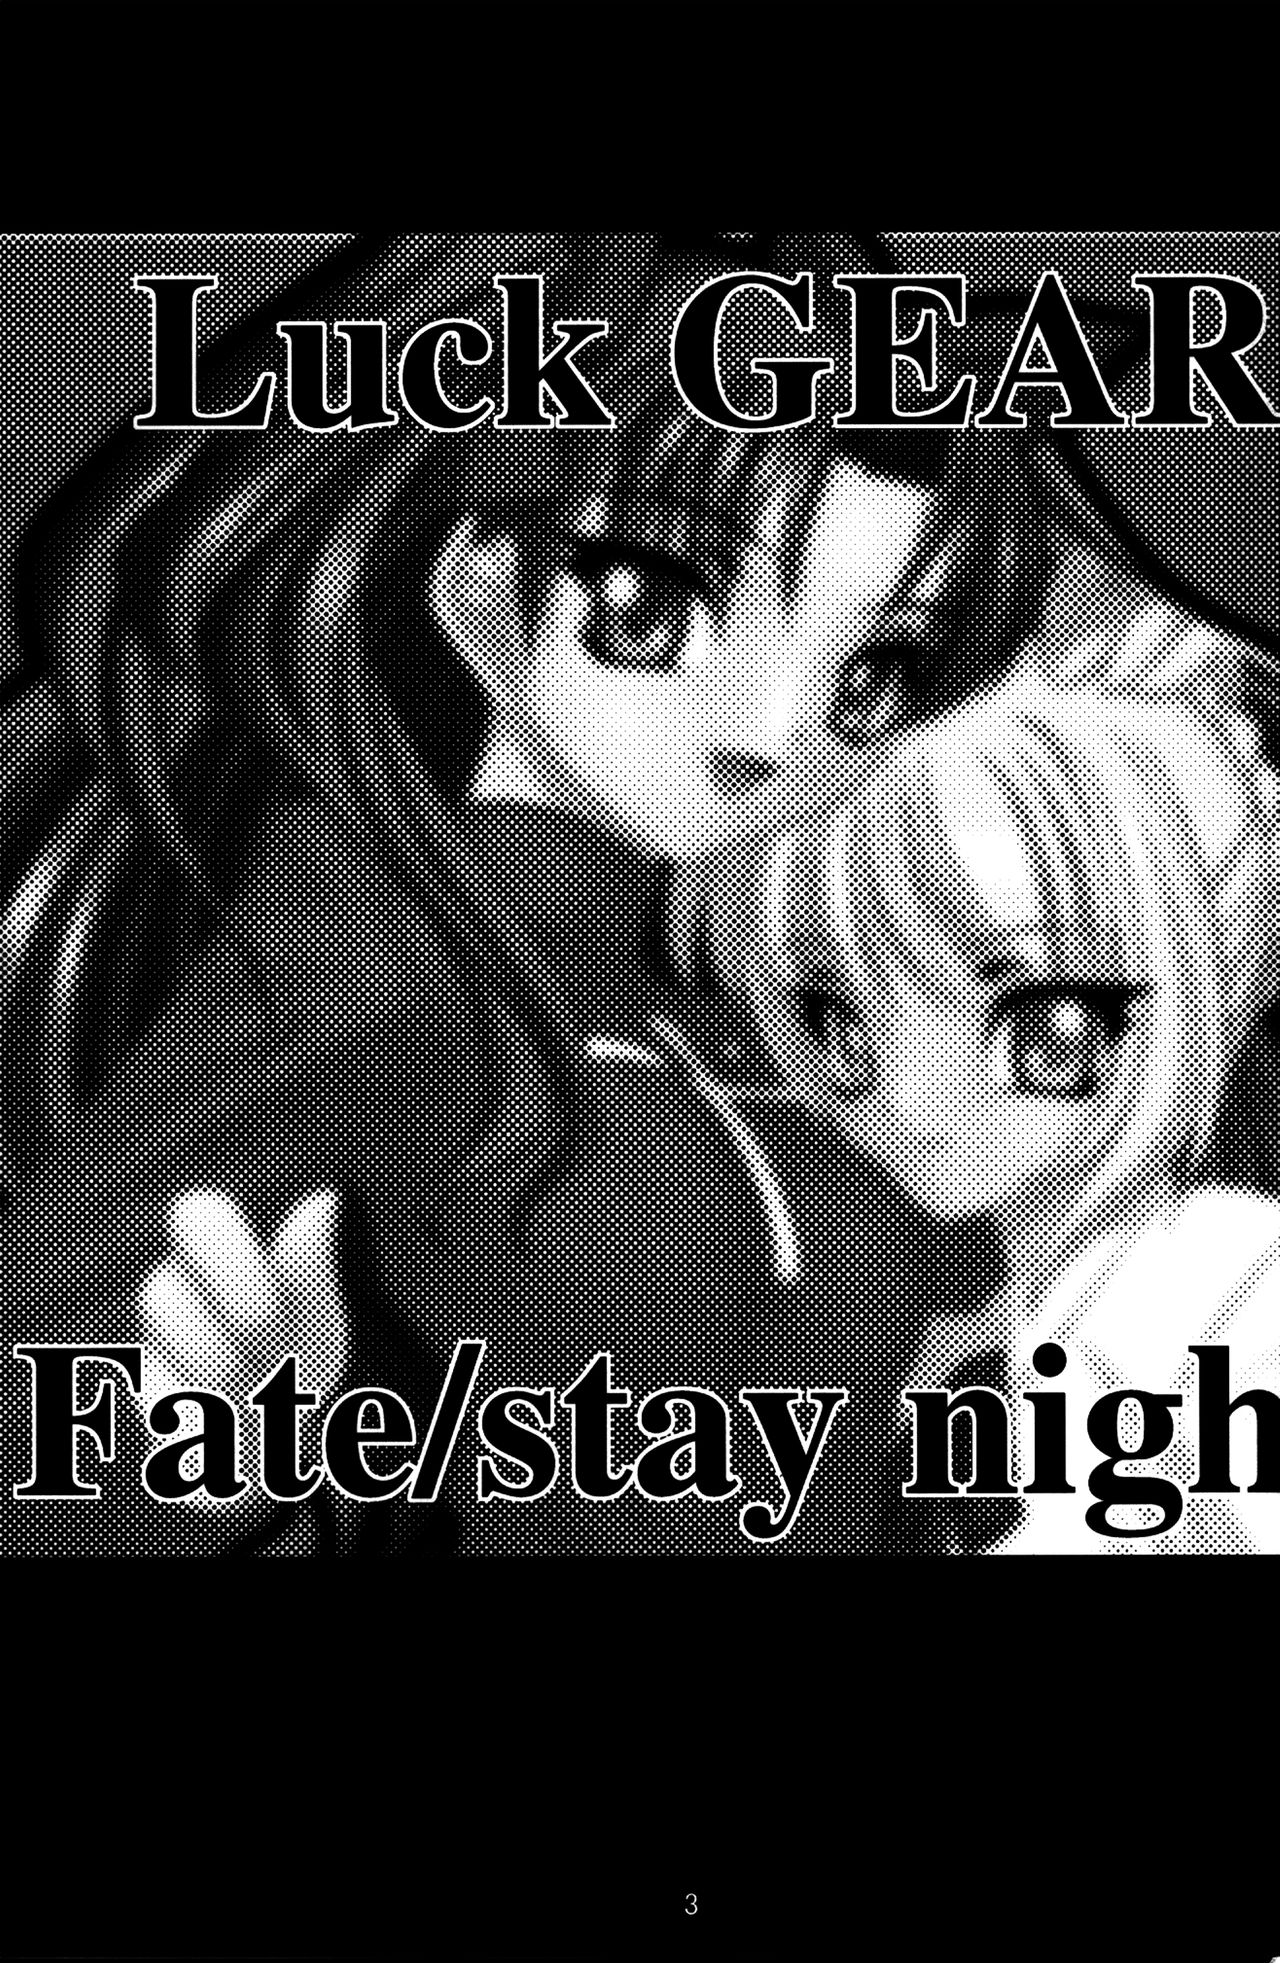 (C68) [Luck GEAR (桜りゅうけん)] Fate/Luck GEAR material (Fate/stay night)